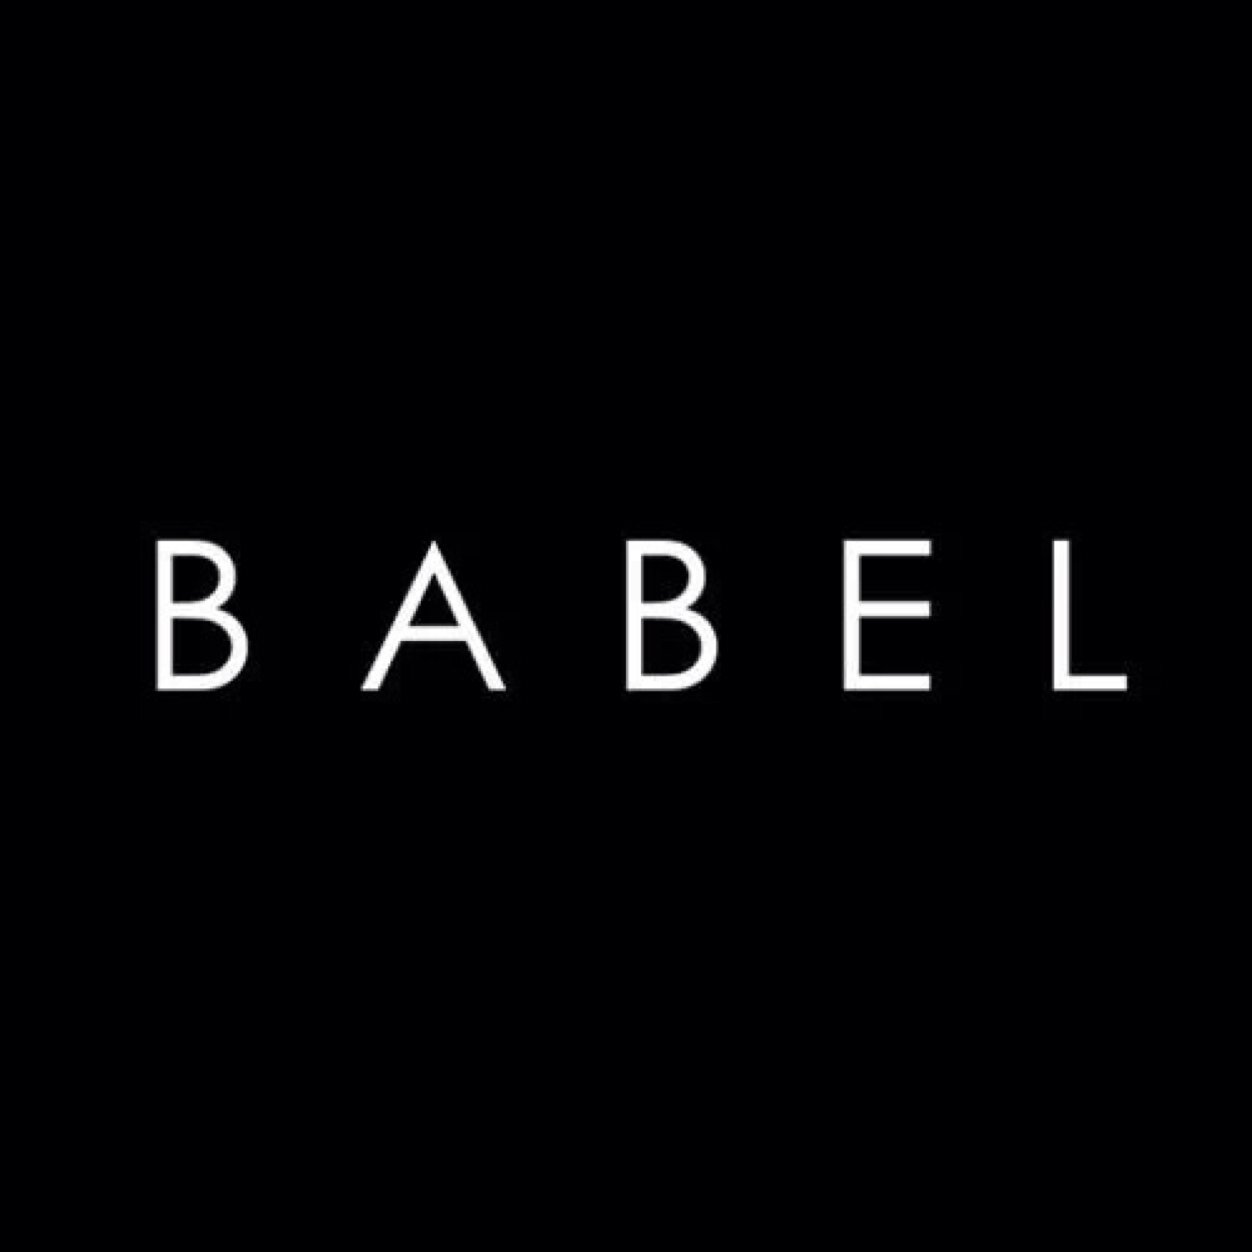 BABEL is an online destination covering news, trends and opinion in fashion, grooming, art, entertainment, lifestyle, culture and more.